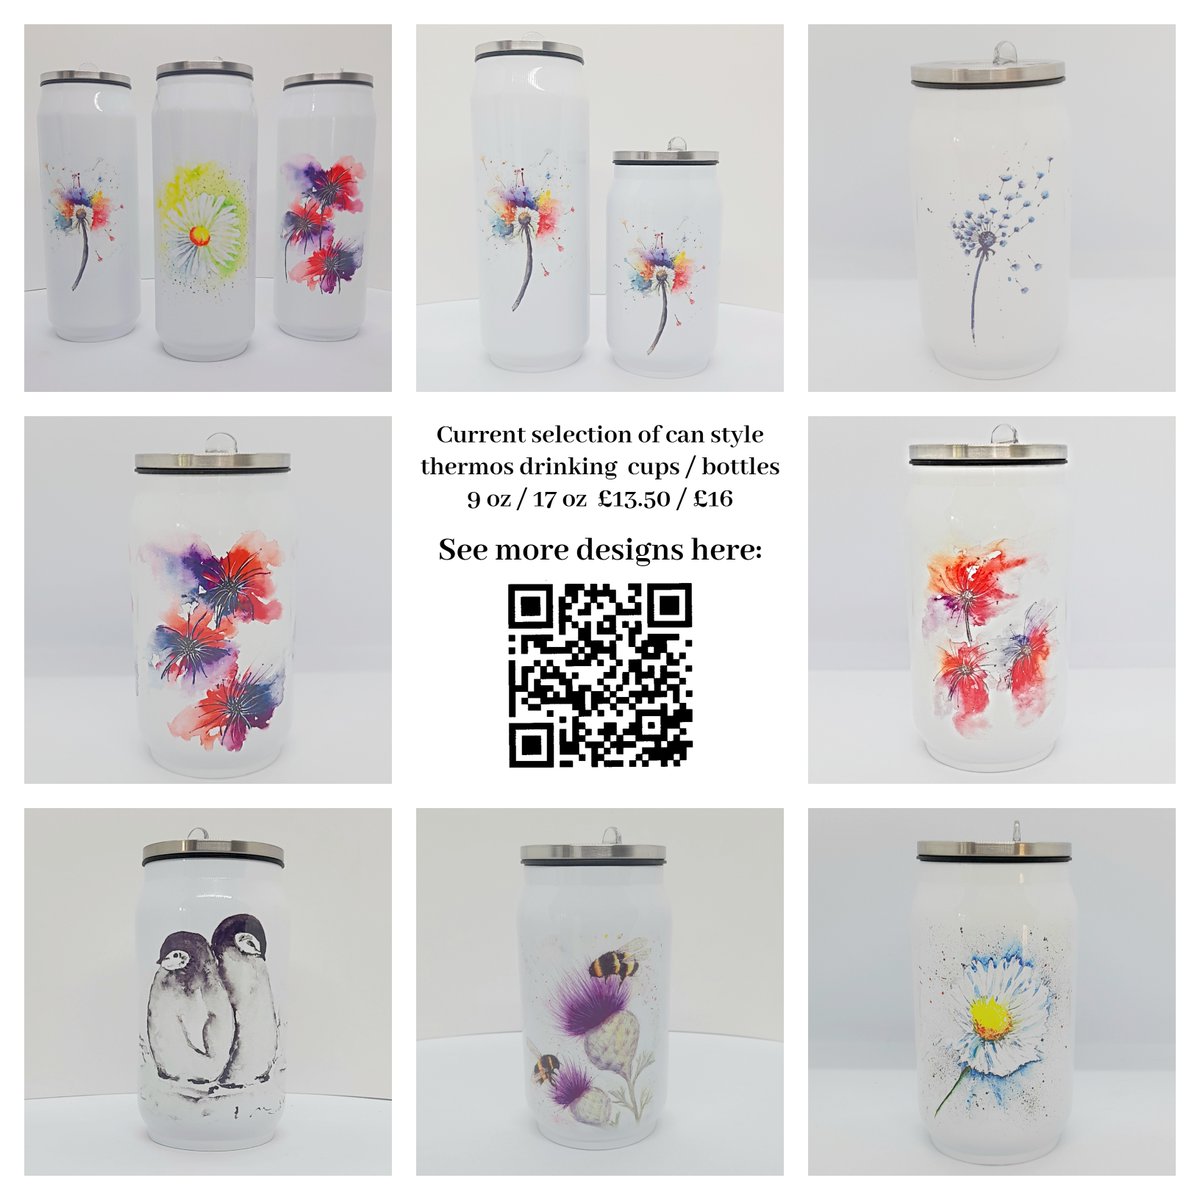 Whatever your choice, these can style drinks bottles / cups will keep your drink however you like it art-by-lacey.sumupstore.com/products?categ… #EarlyBiz #drinks #art #bottle #MHHSBD #CraftBizParty